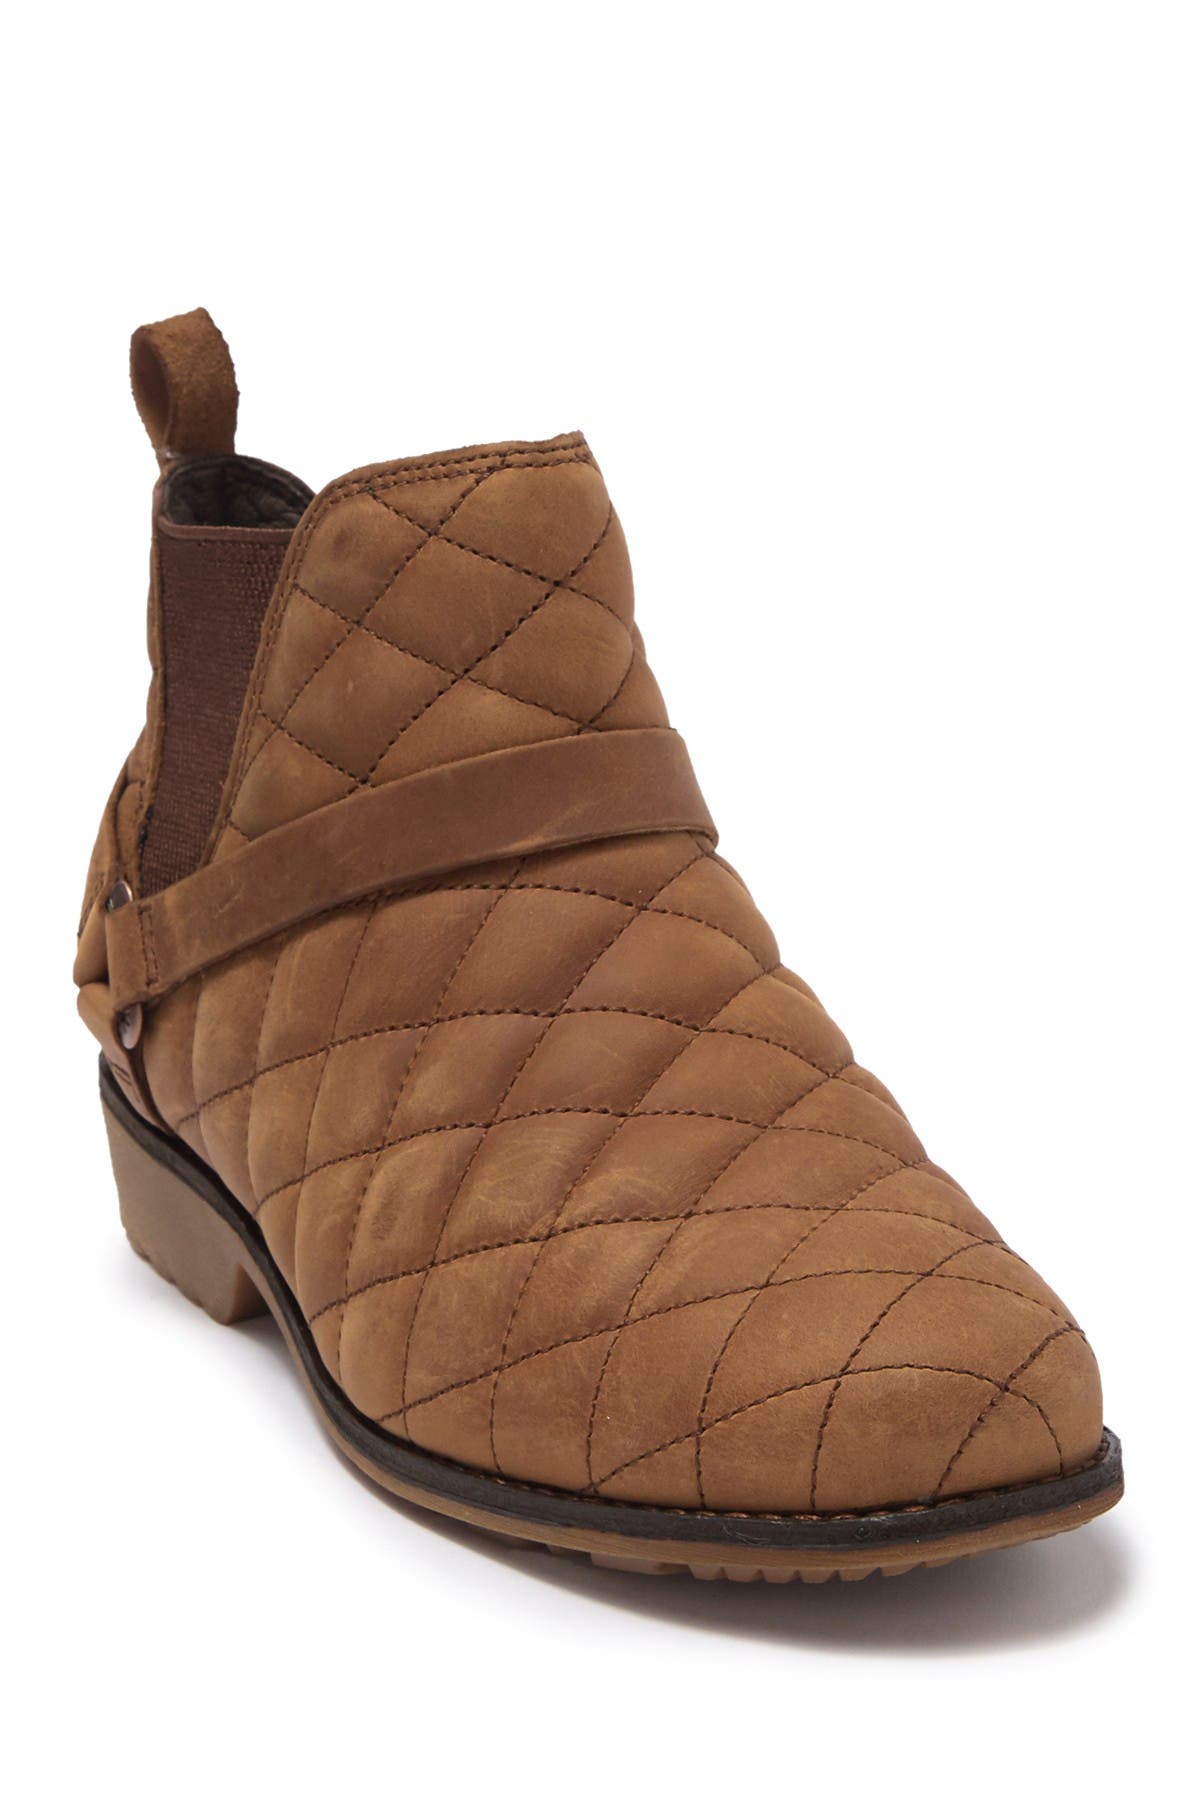 teva quilted shoe